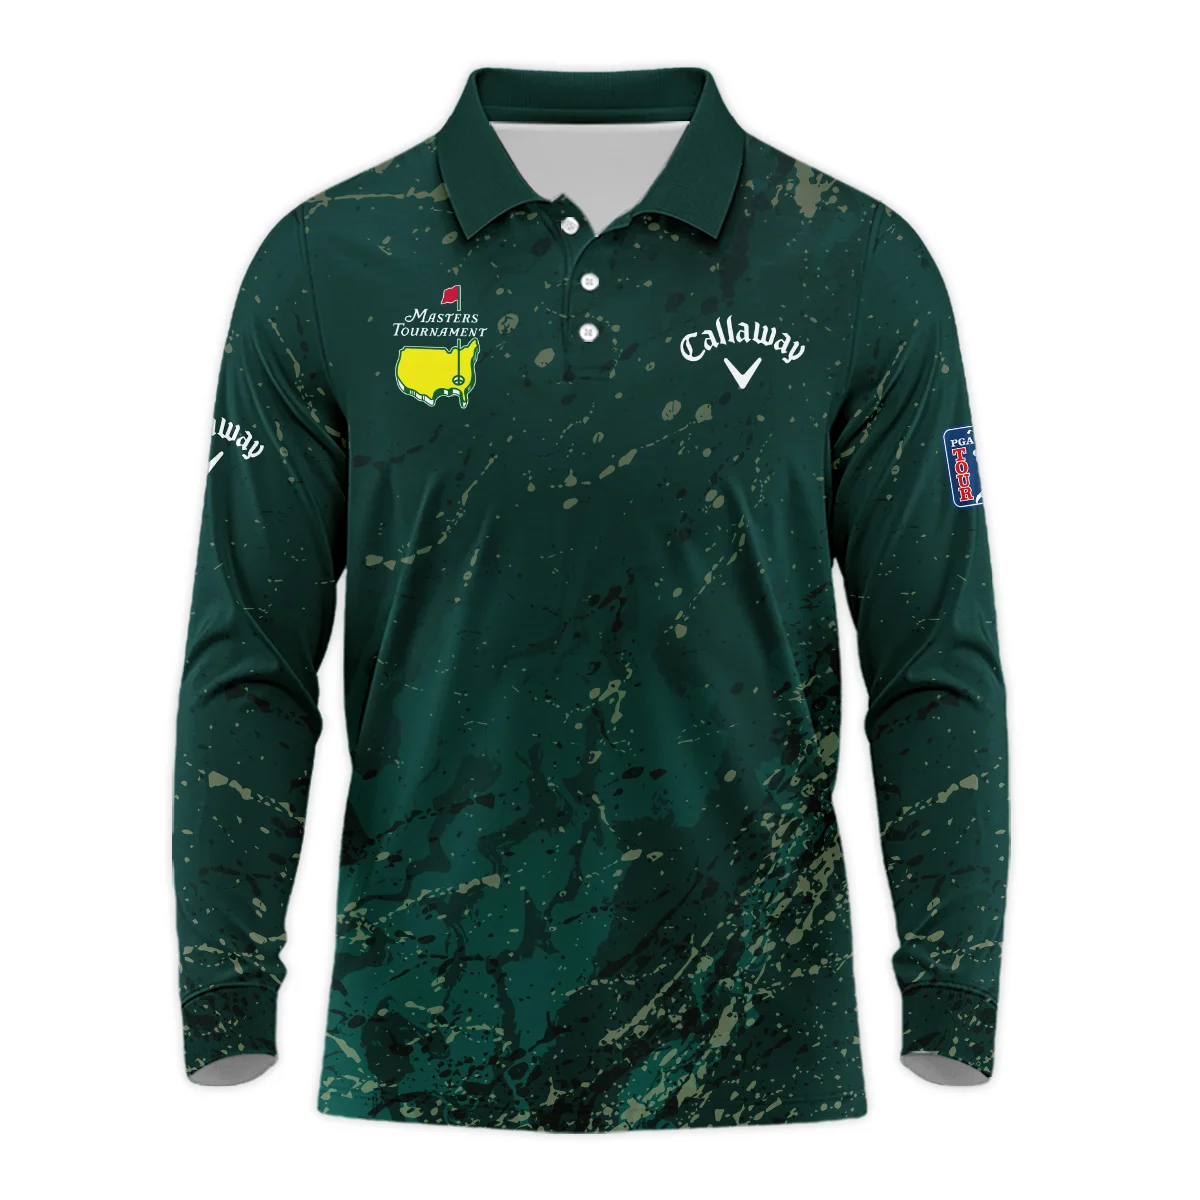 Old Cracked Texture With Gold Splash Paint Masters Tournament Callaway Bomber Jacket Style Classic Bomber Jacket